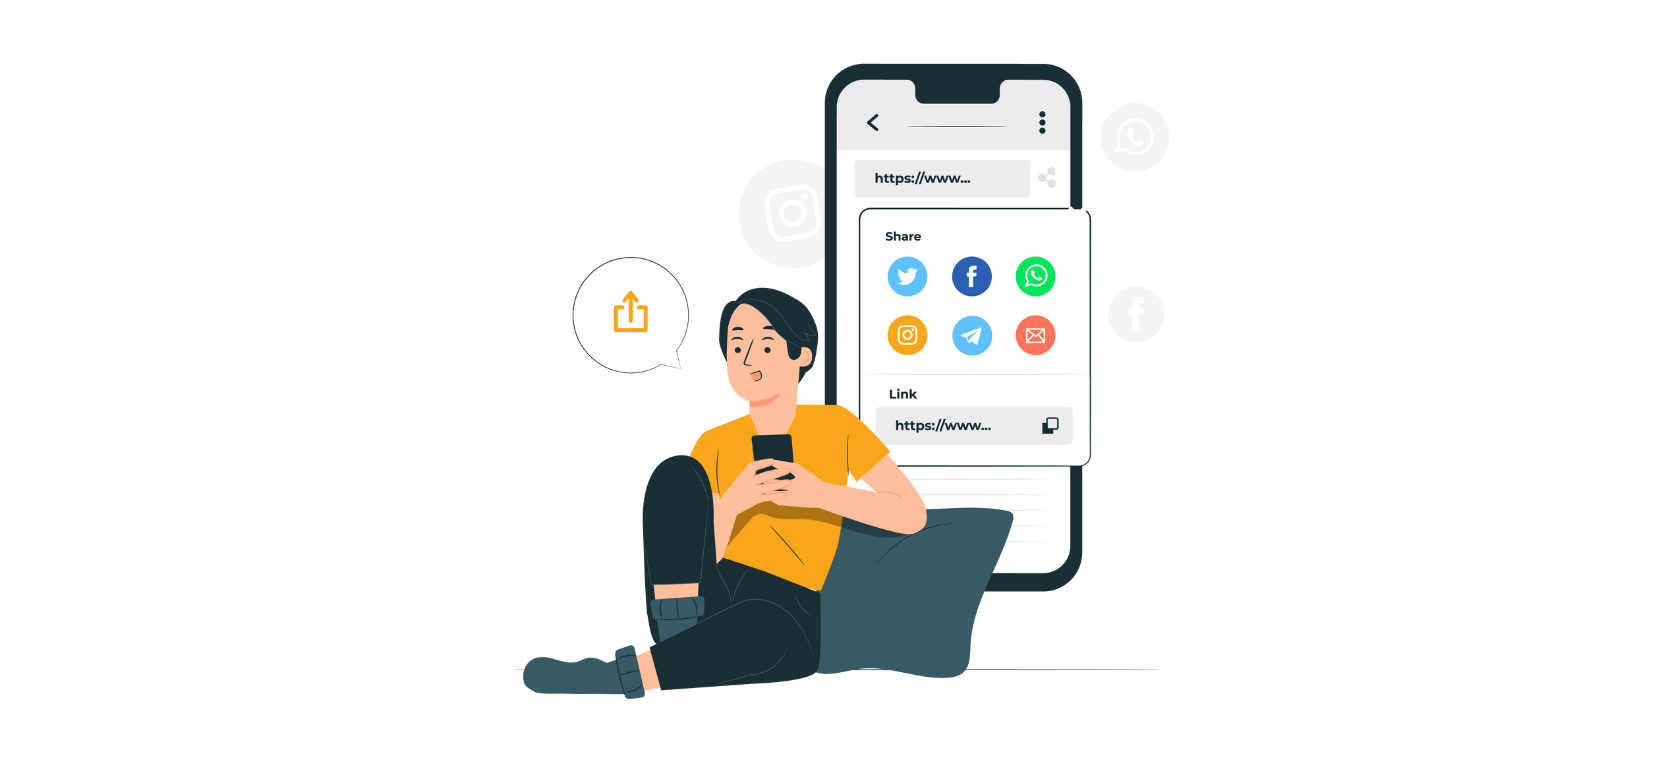 The illustration shows a person sharing the link on social media via smartphone.